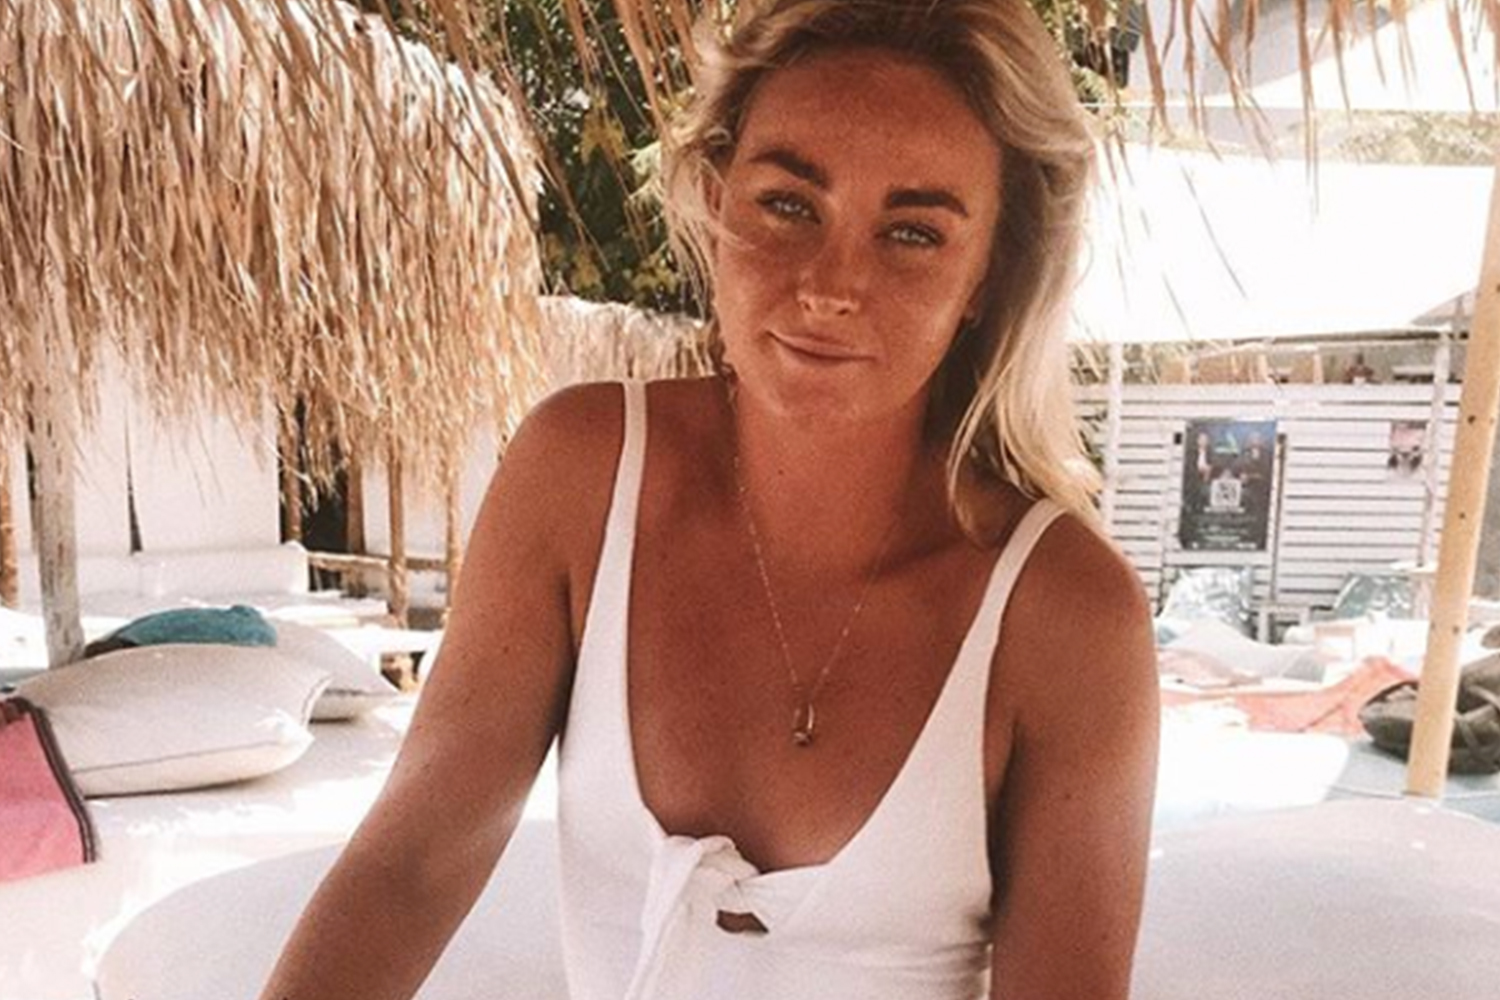 Australian Instagram Model Posts Chilling Message Before Her Mysterious Death